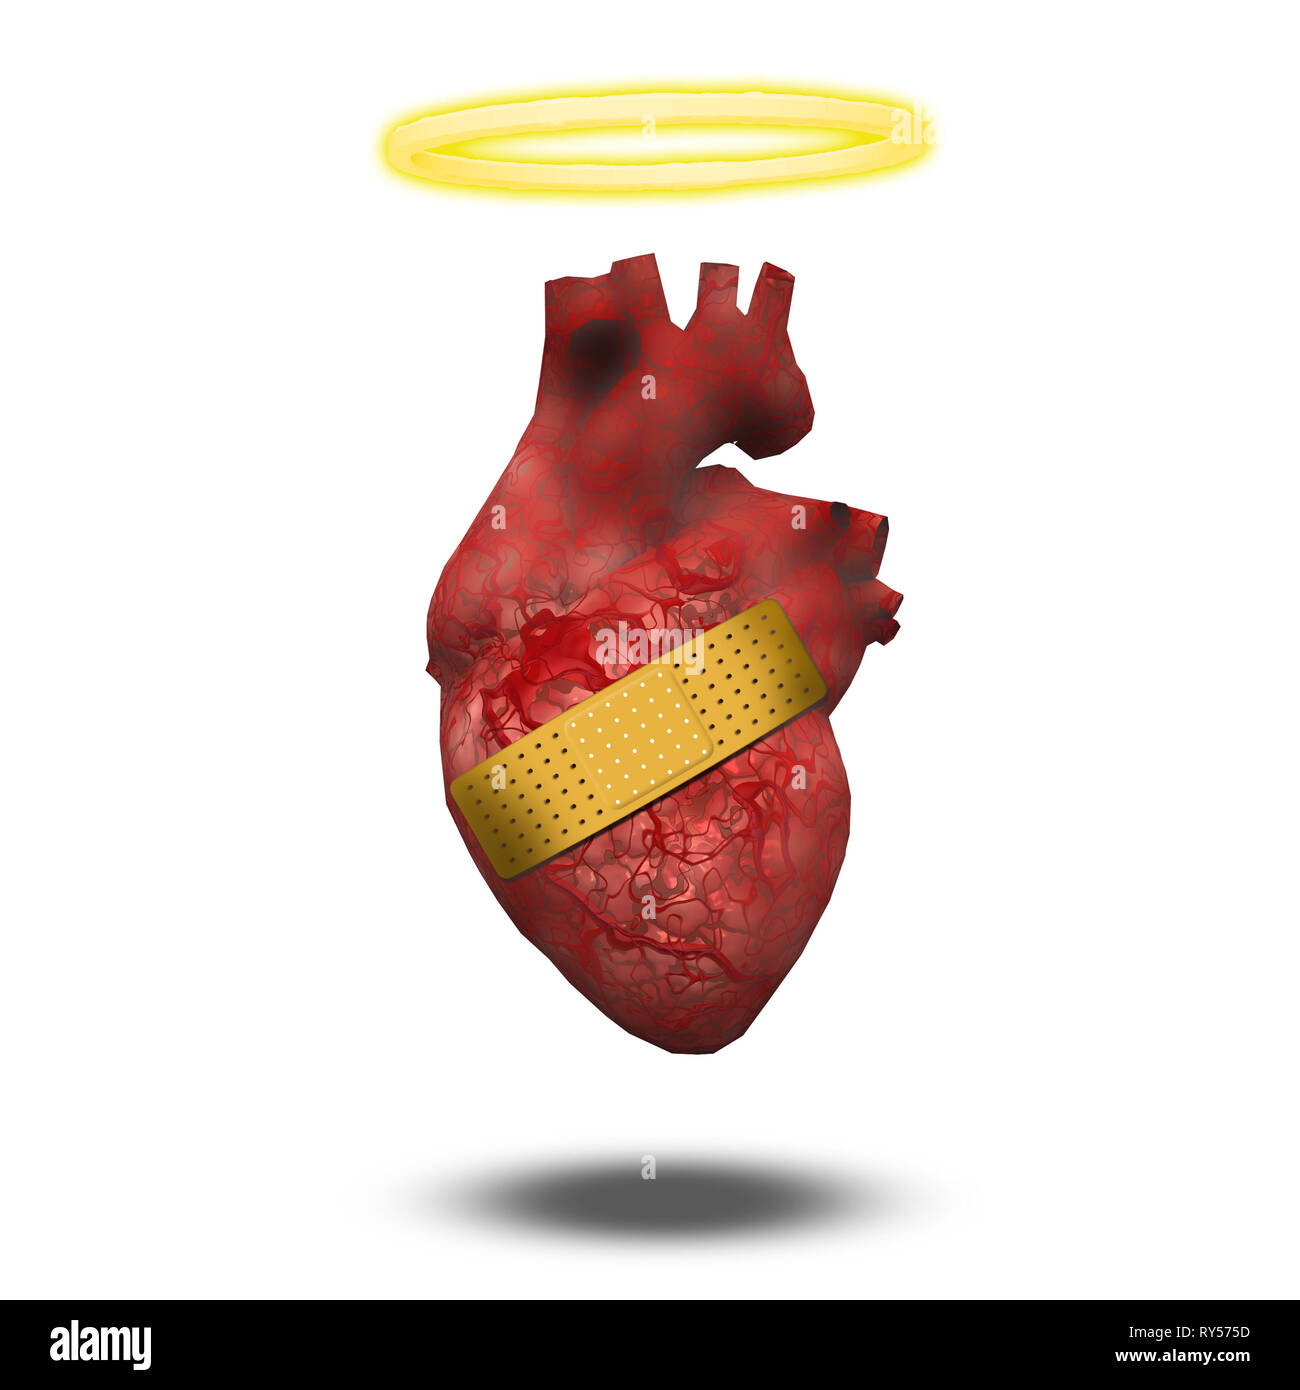 Wounded good heart with angelic halo Stock Photo